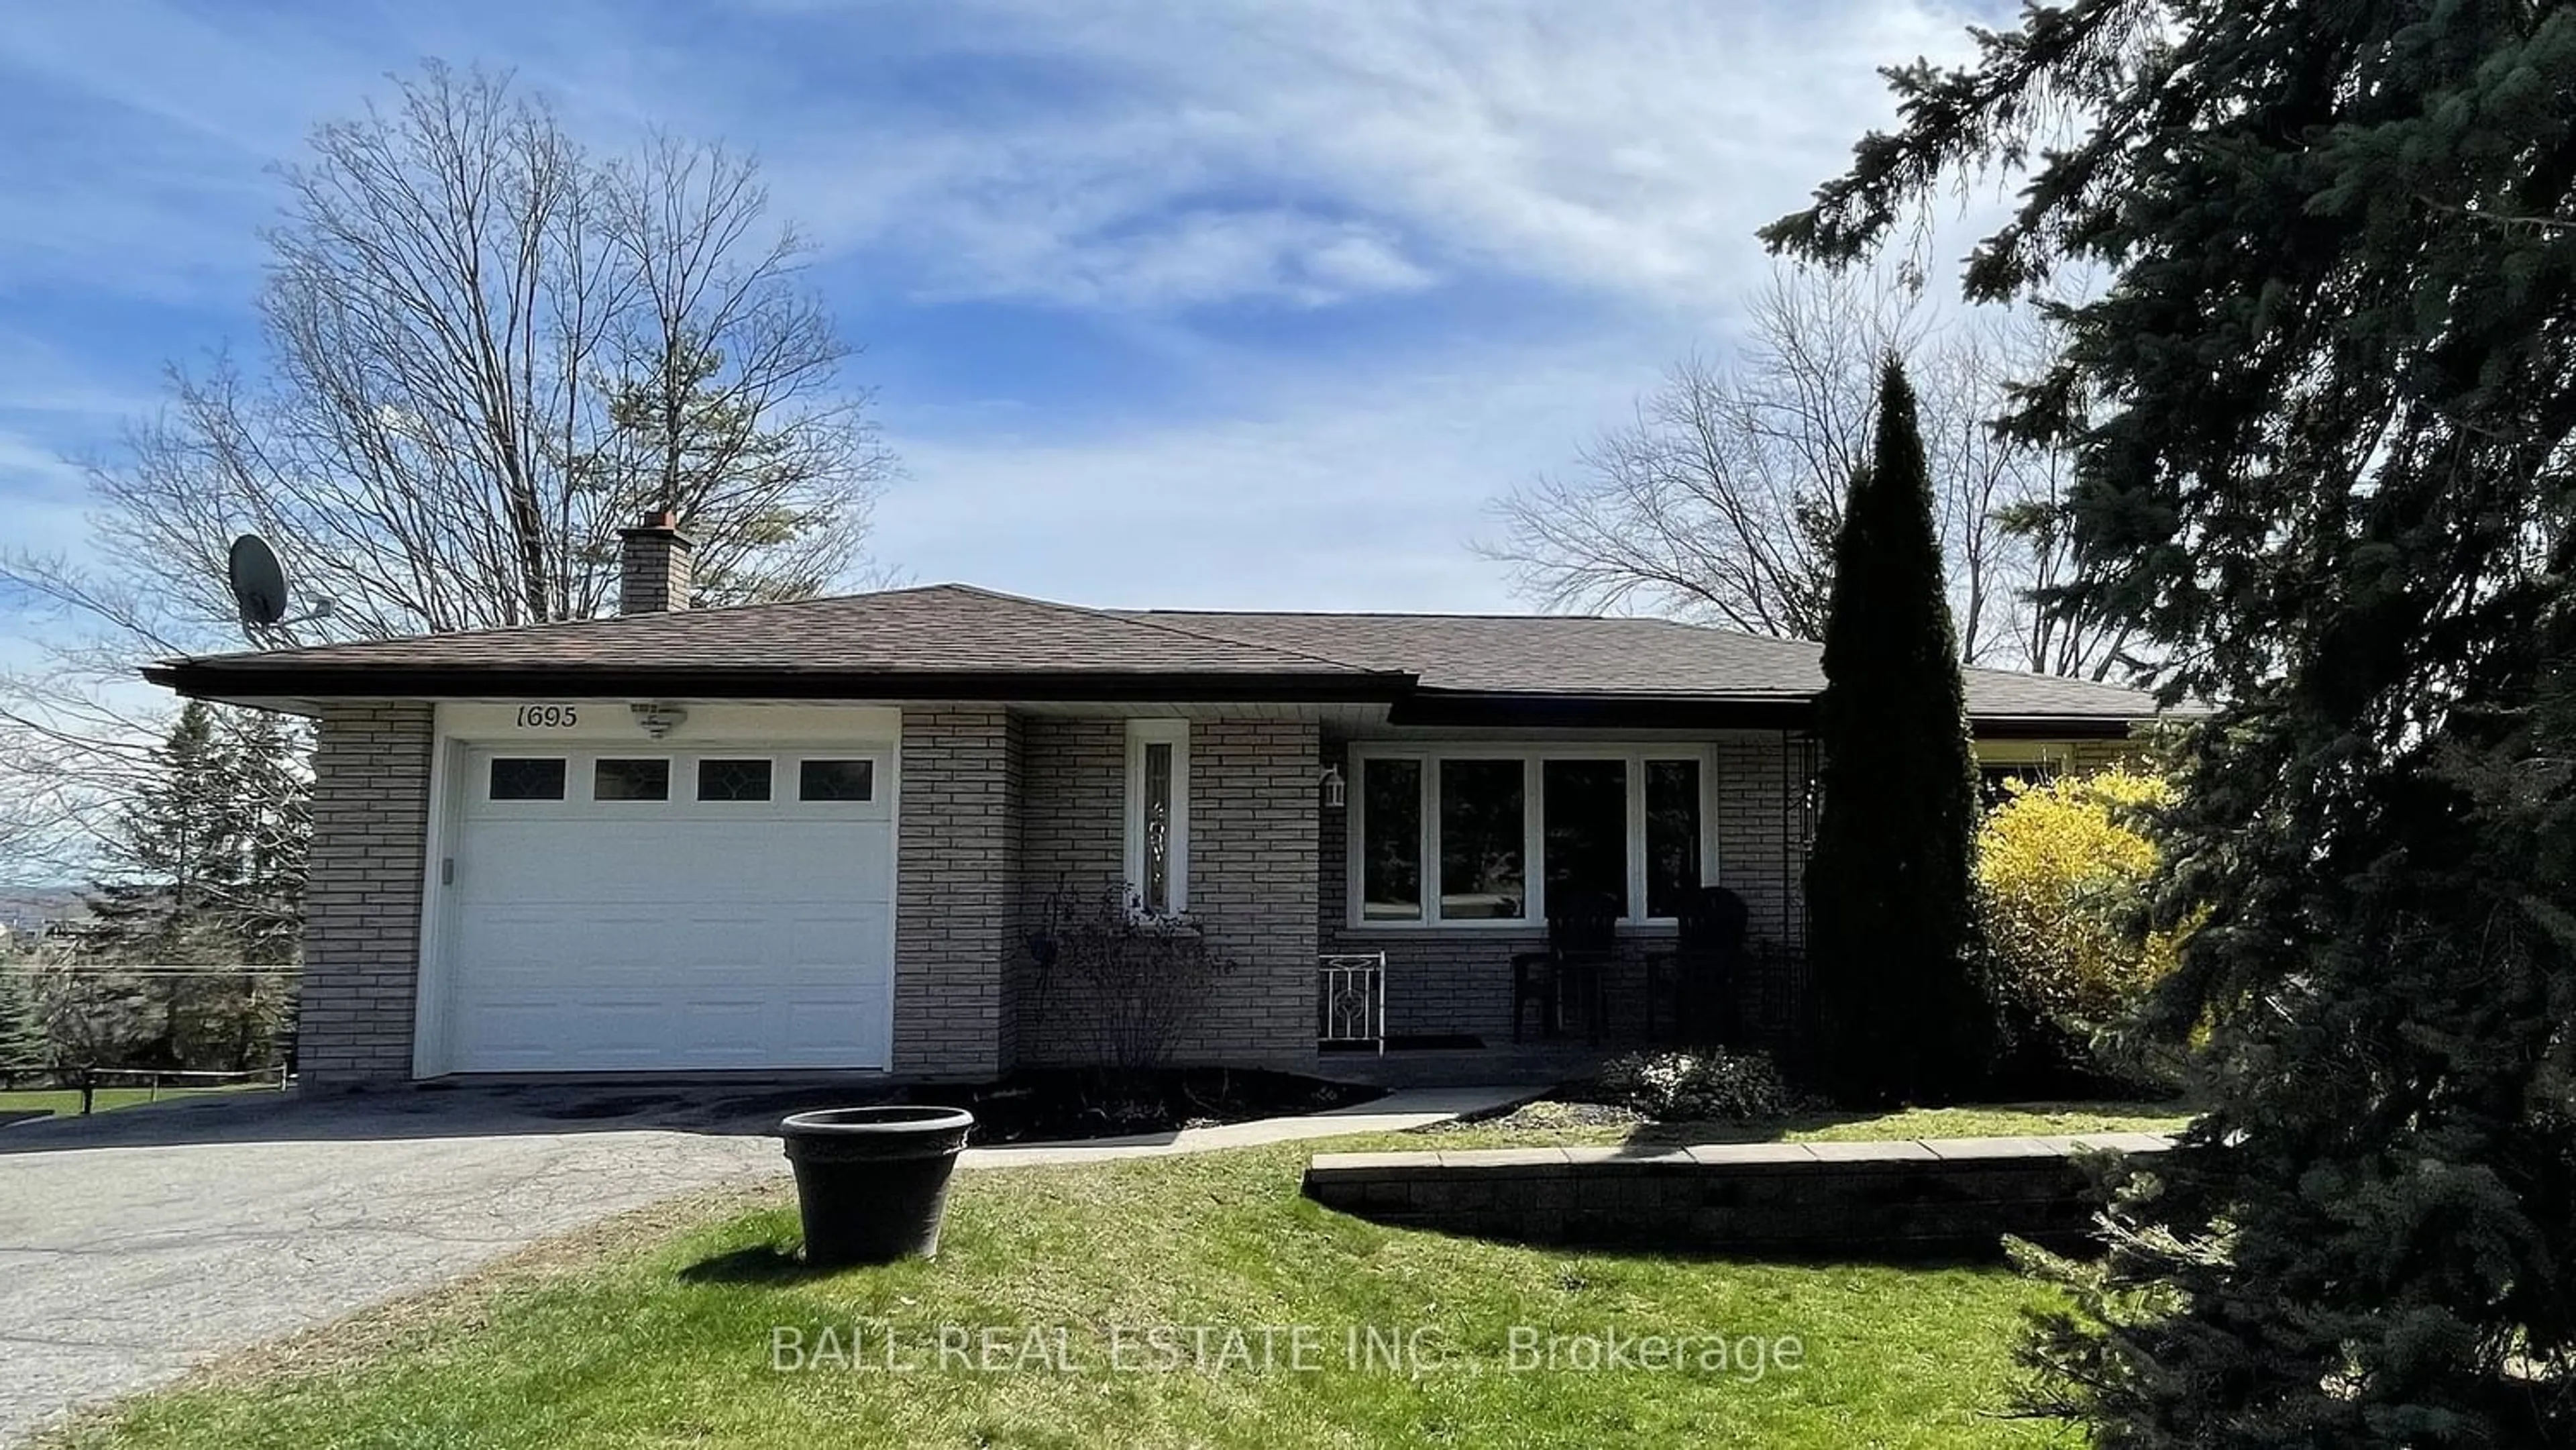 Frontside or backside of a home for 1695 Whittington Dr, Peterborough Ontario K9J 6X6